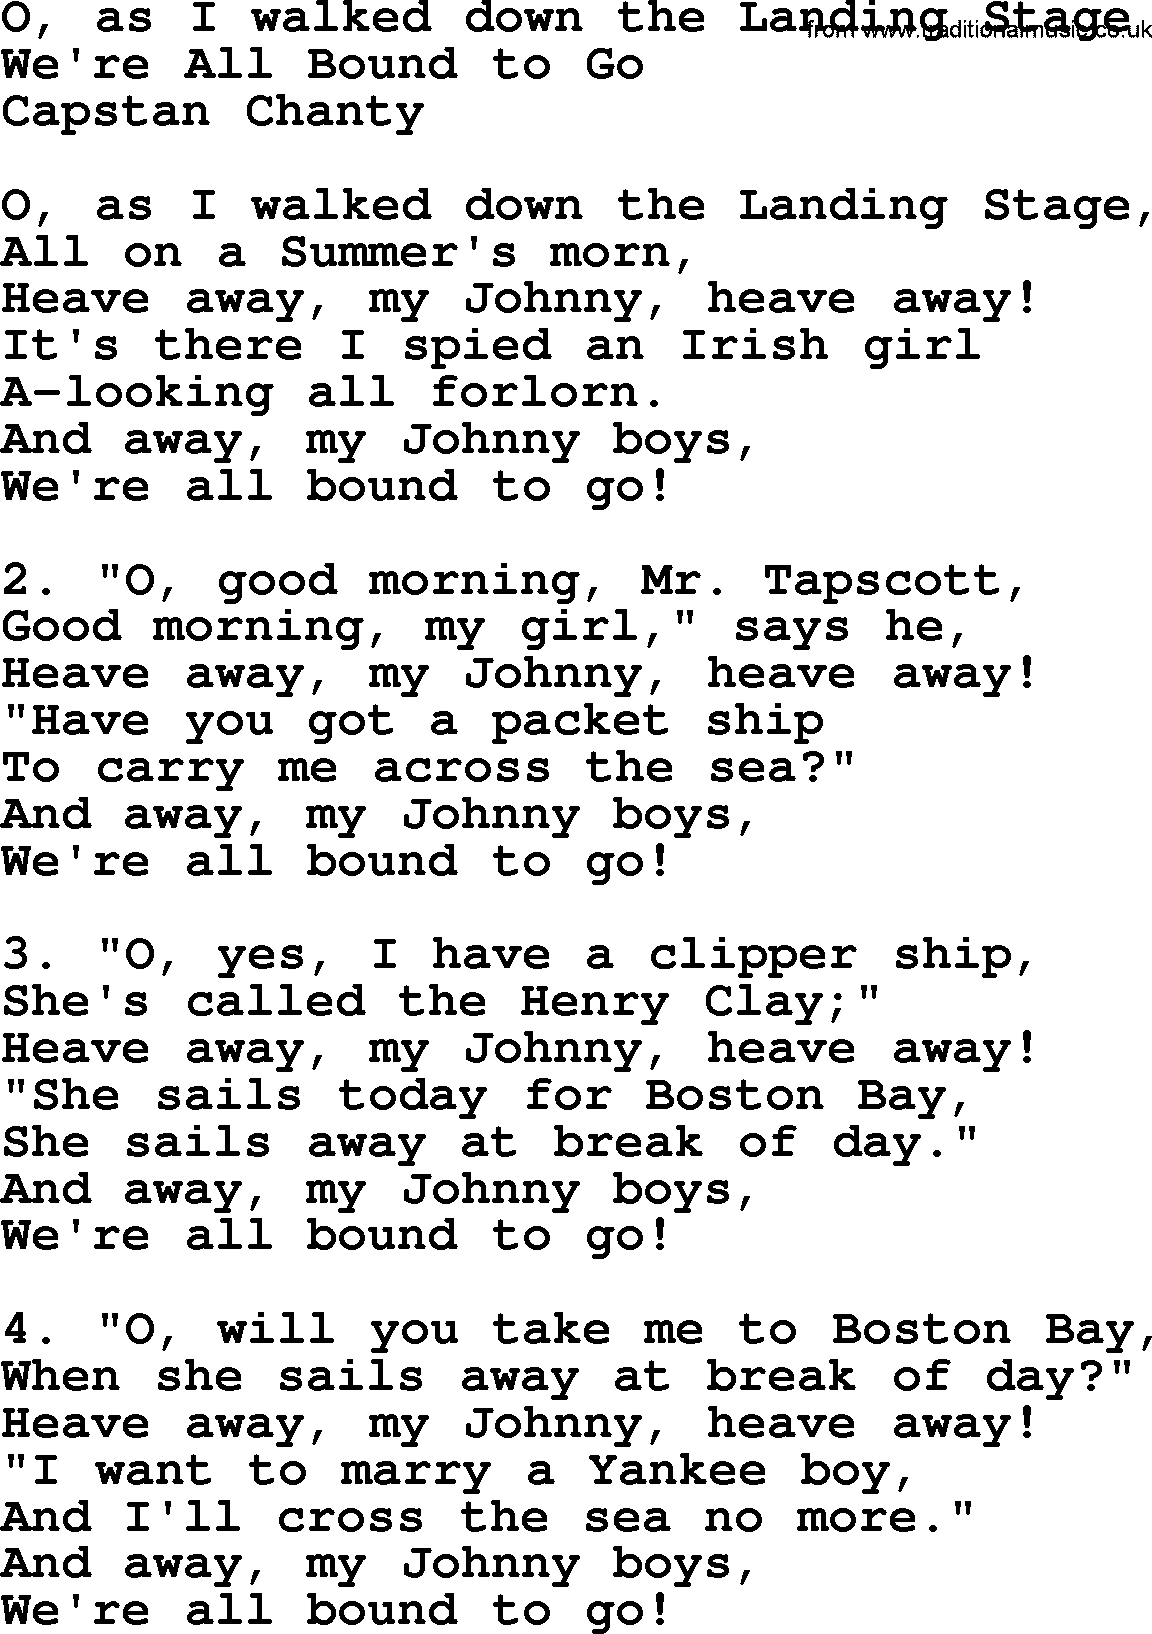 Sea Song or Shantie: O As I Walked Down The Landing Stage, lyrics